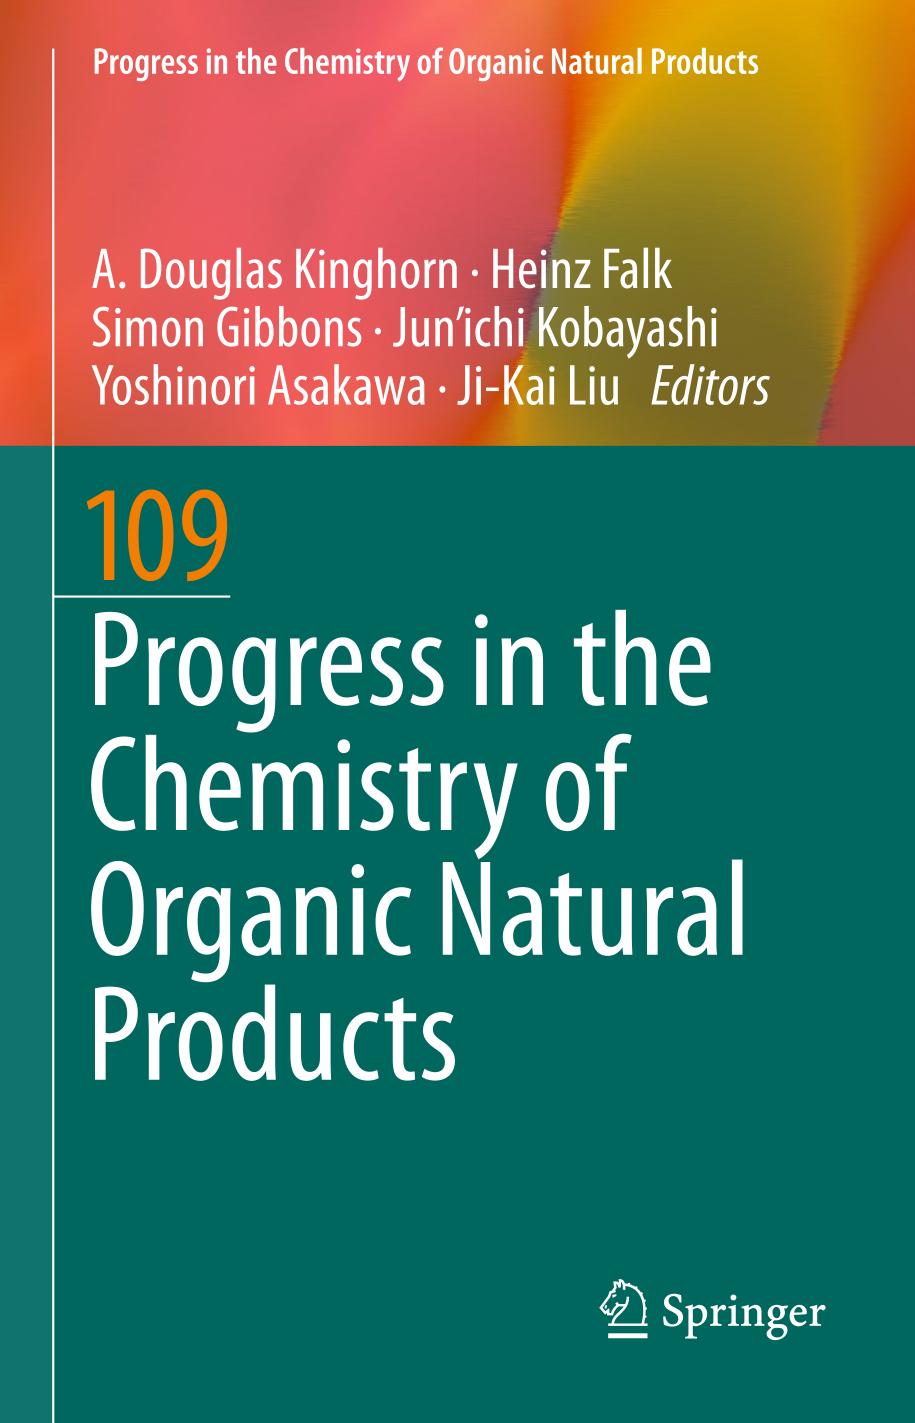 Progress in the Chemistry of Organic Natural Products 109.